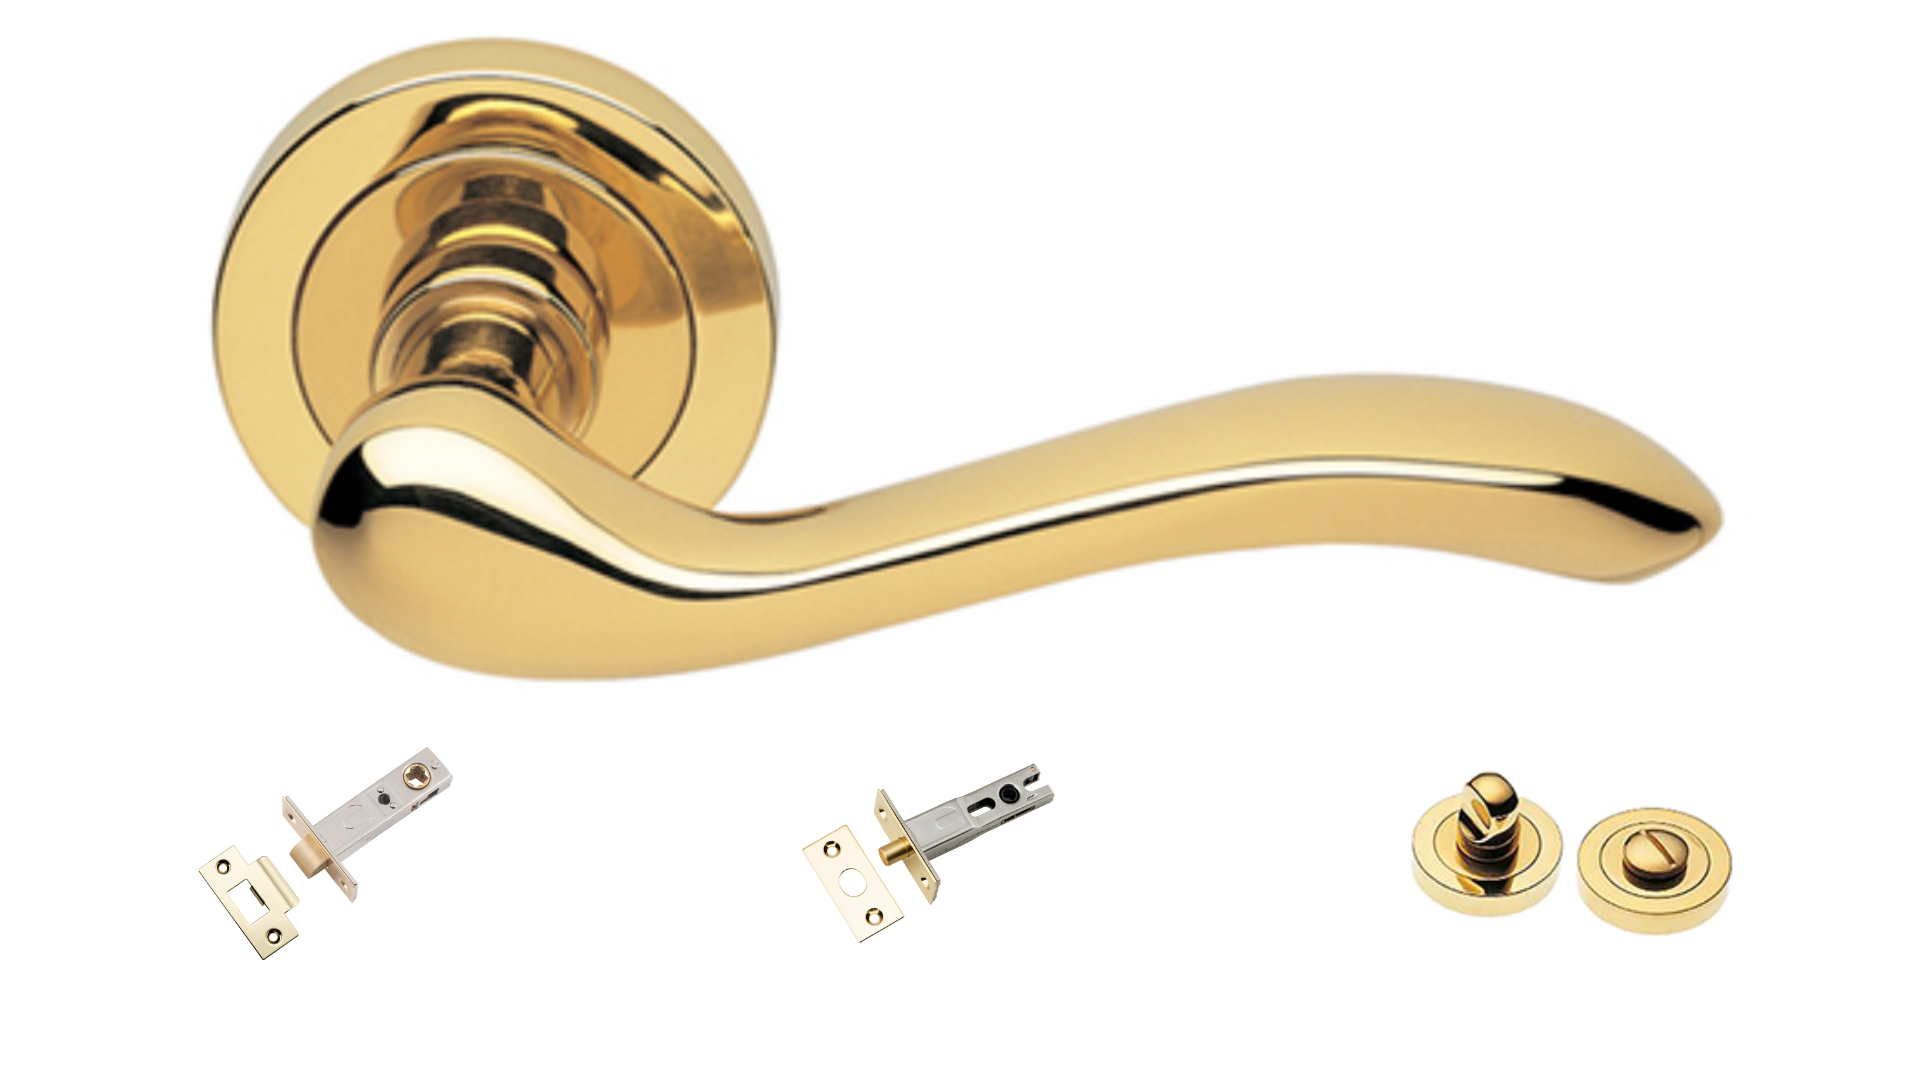 The Erica door handle in polished brass with a tubular latch, privacy bolt and privacy turn kit underneath on a white background.